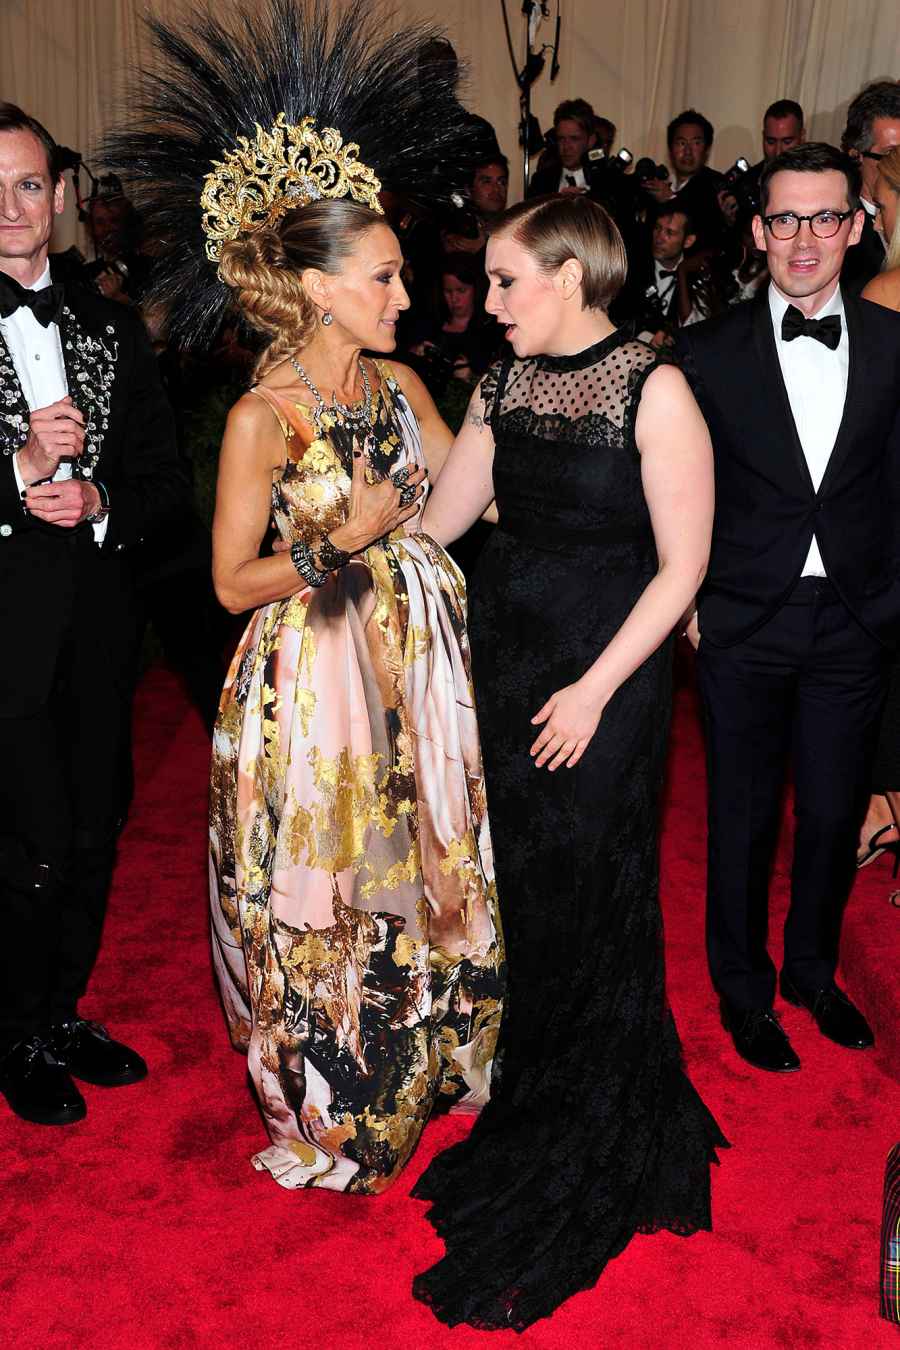 Sarah Jessica Parker and Jennifer Lawrence Funny Celebrity Interactions at the Met Gala